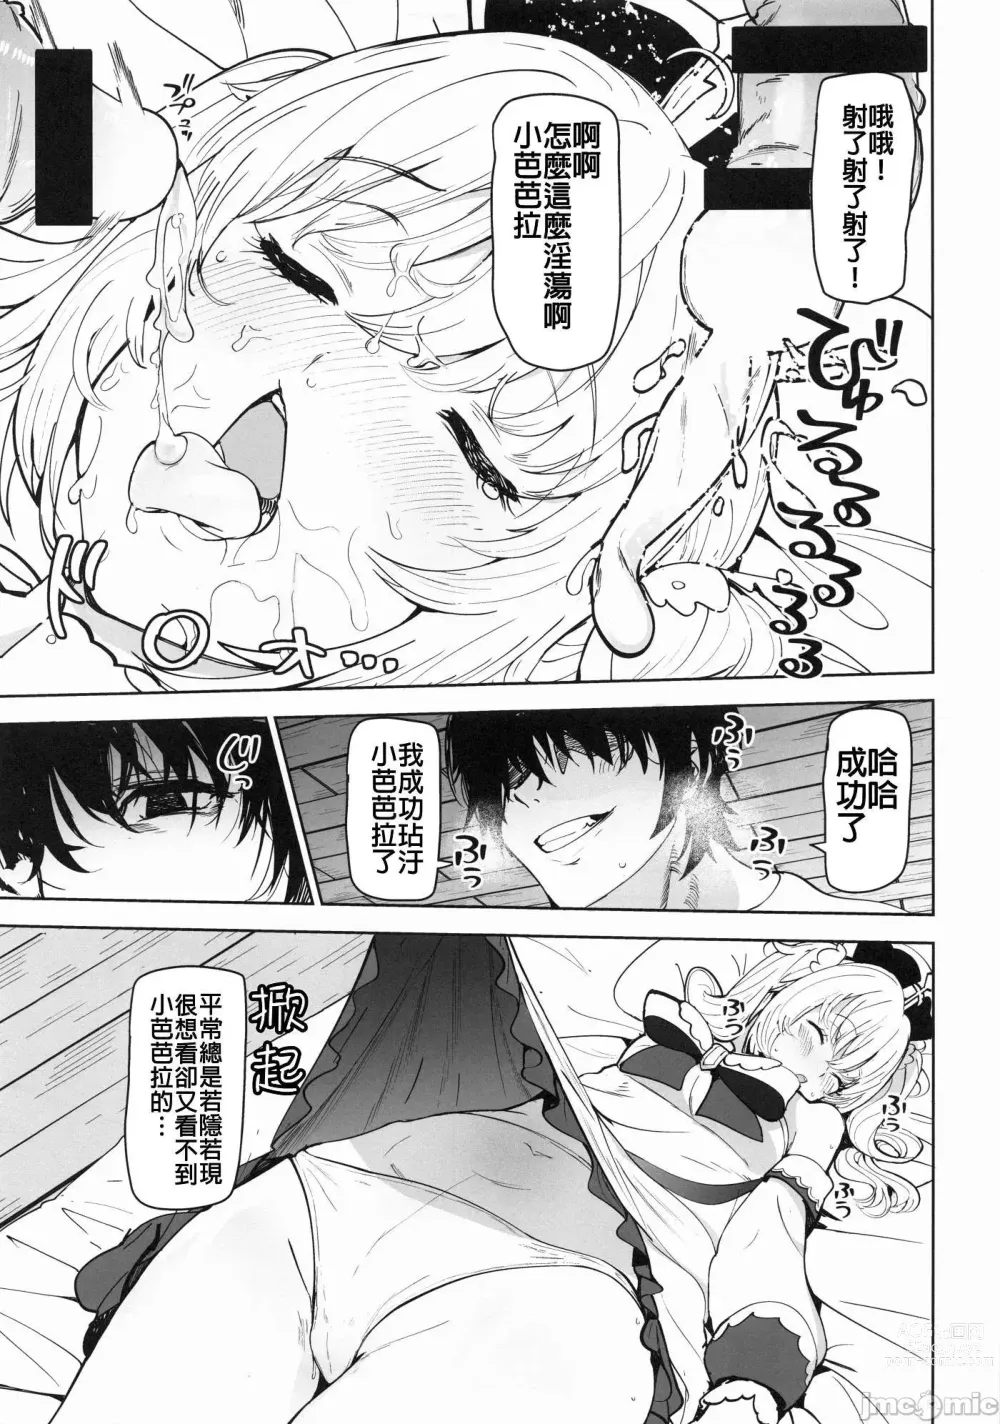 Page 8 of doujinshi 芭芭拉 入眠